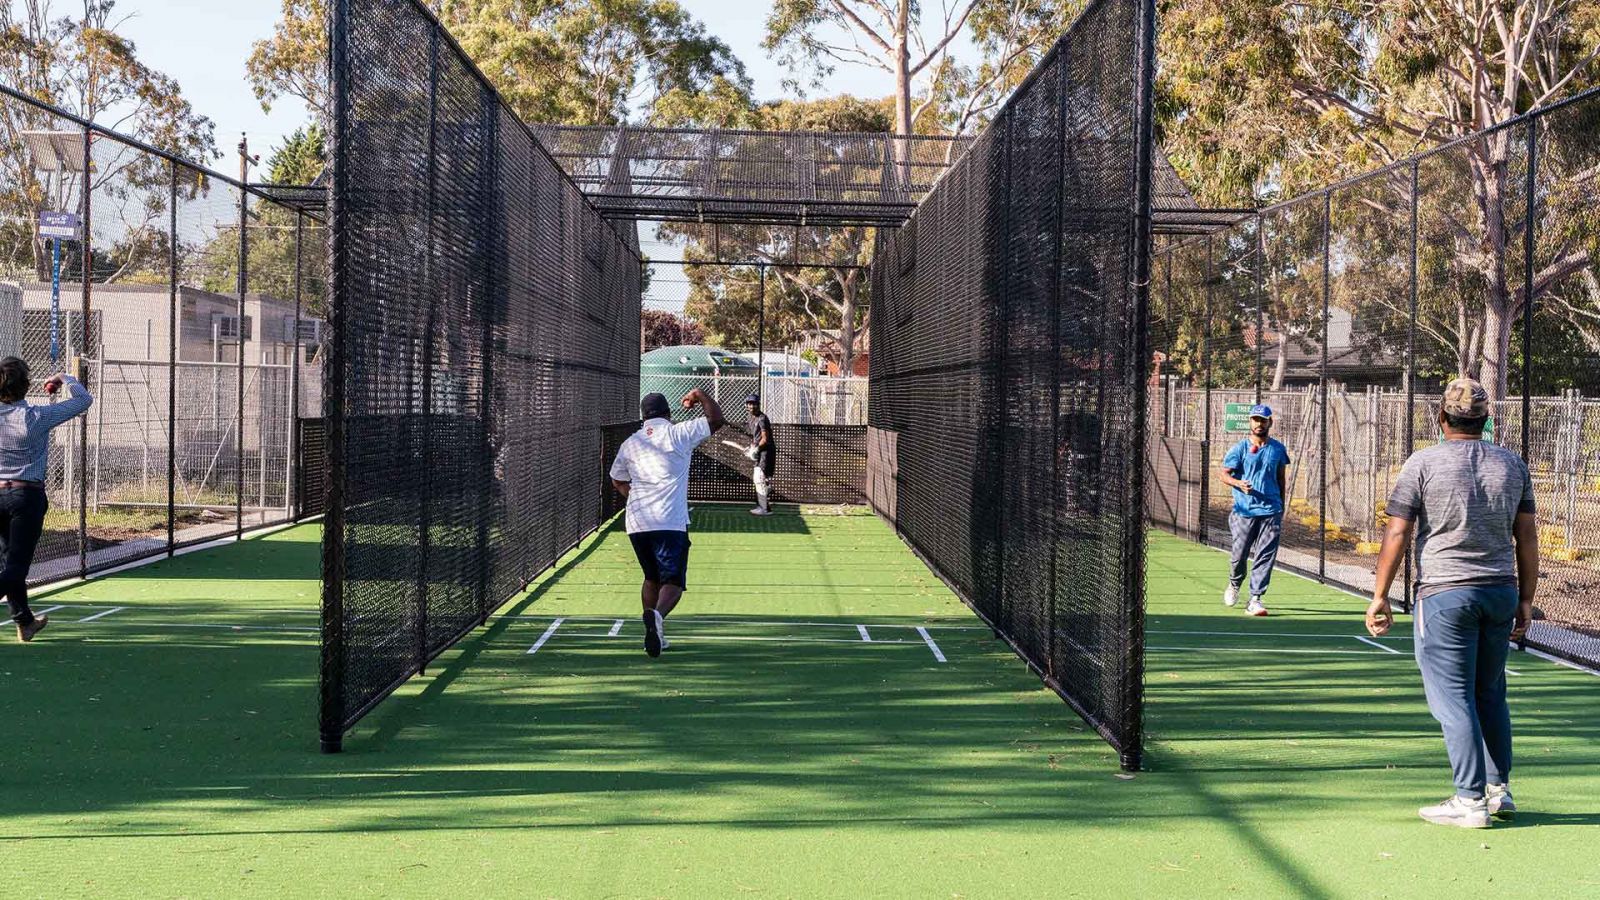 Players from Bellfield Cricket Club practicing bowling at batting in the new cricket practice nets.